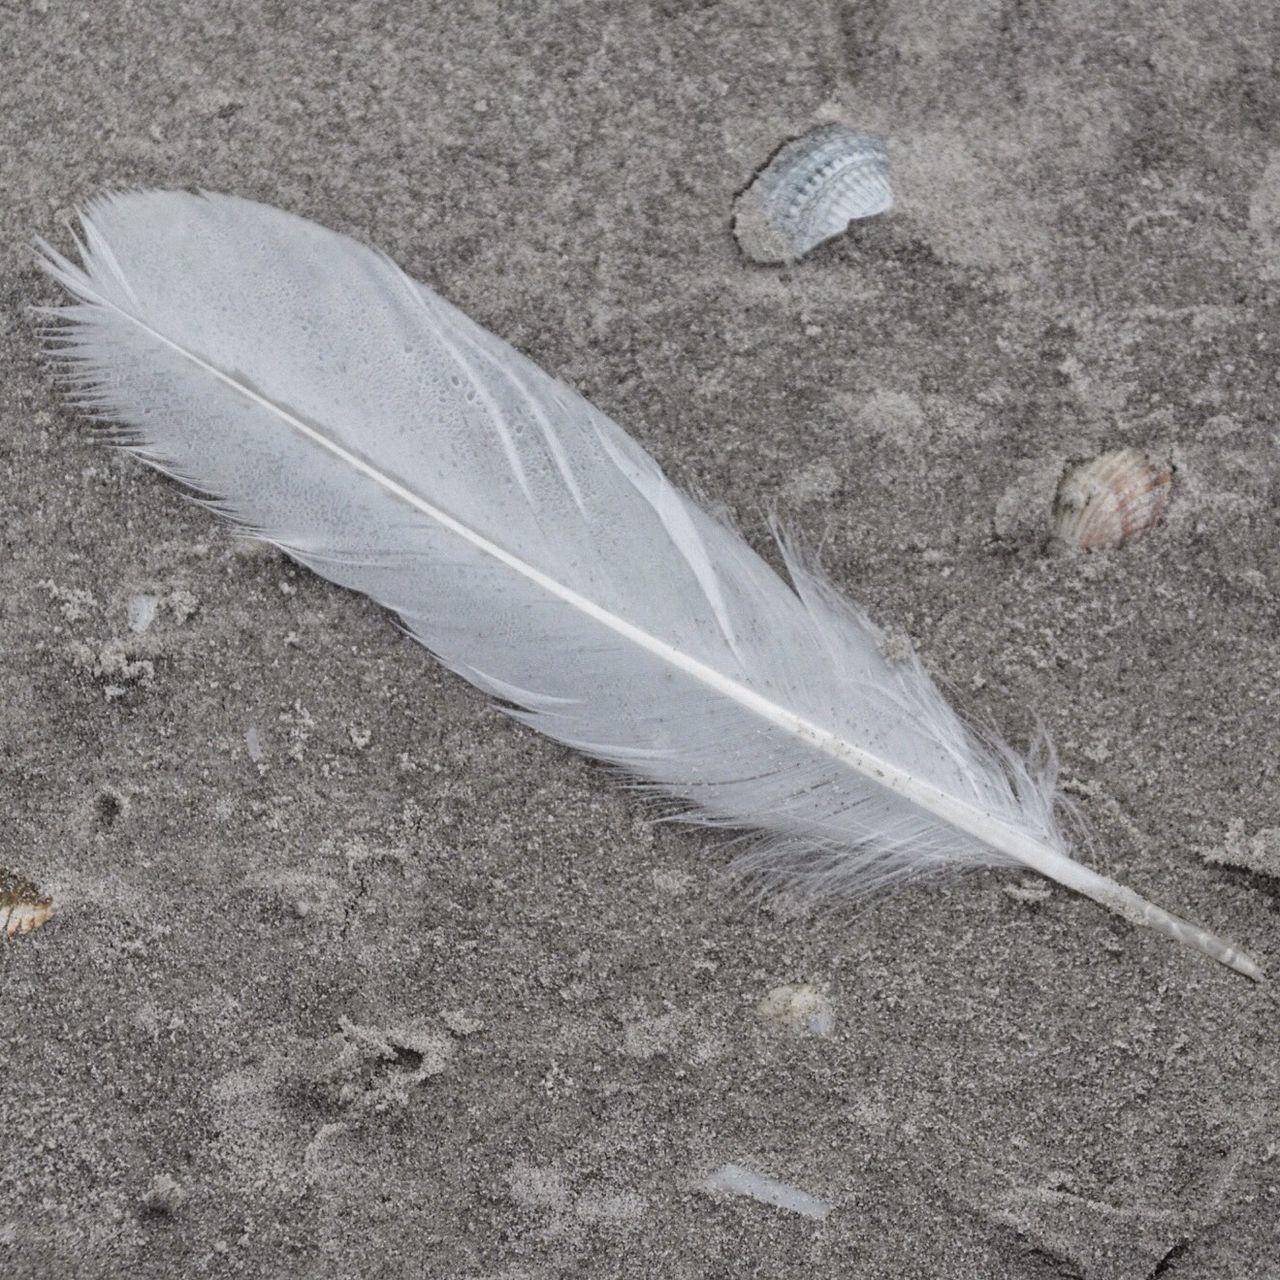 high angle view, sand, beach, shore, day, ground, outdoors, nature, no people, sunlight, feather, street, white color, close-up, asphalt, pattern, single object, directly above, road, field